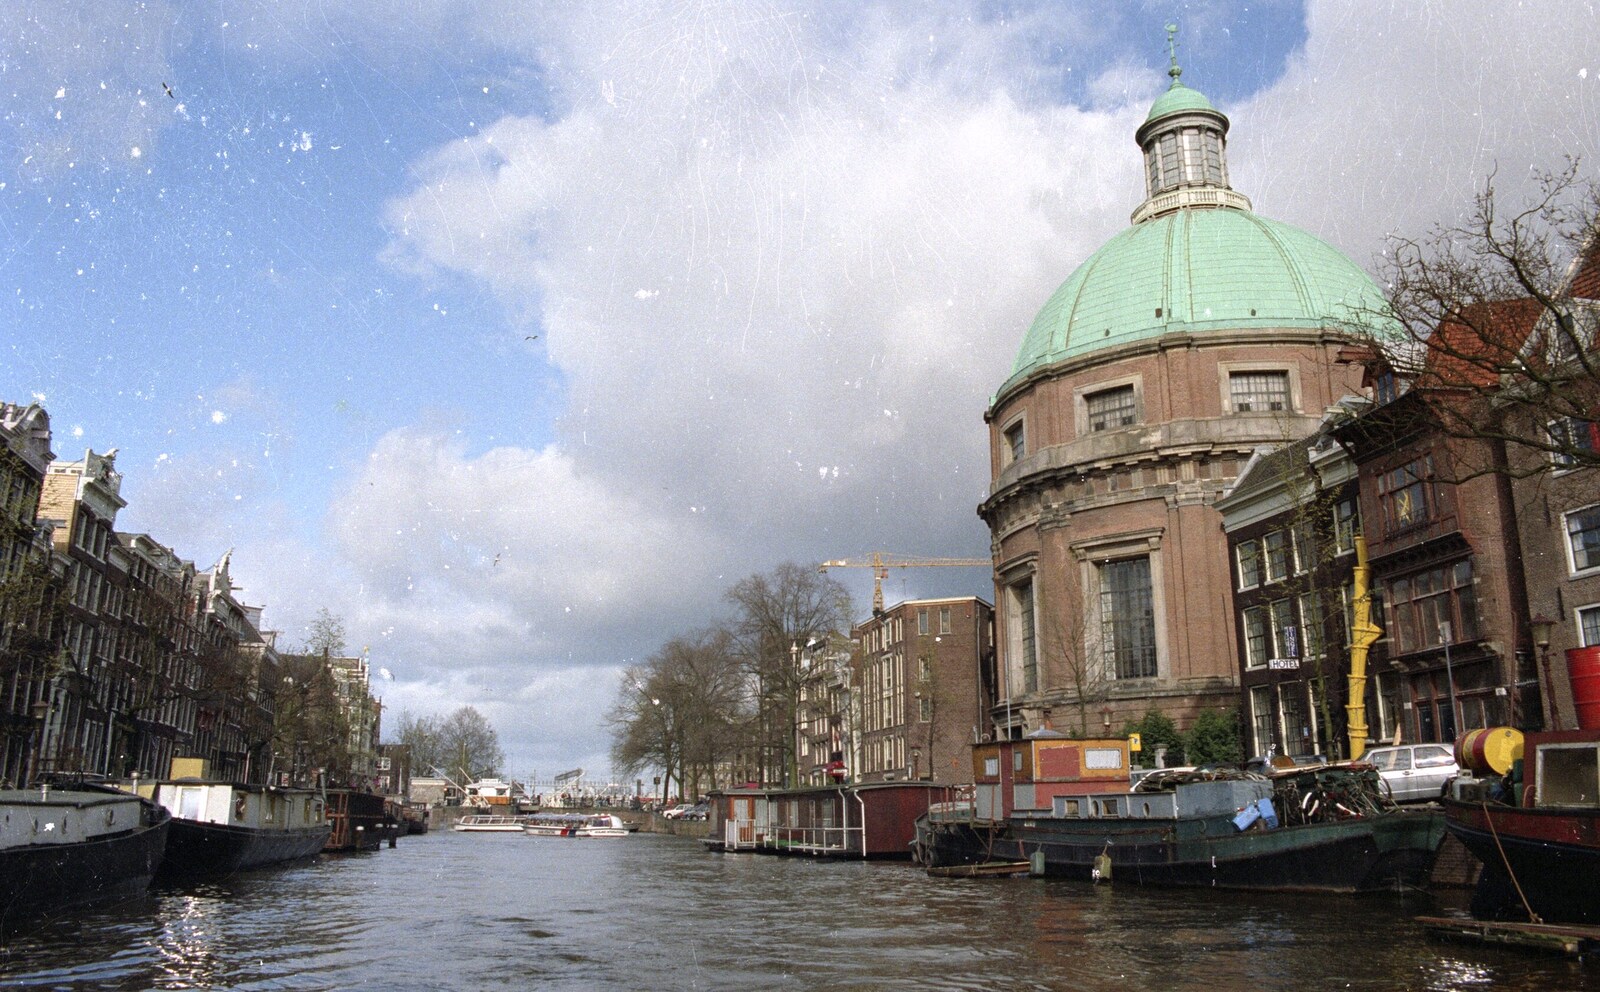 Out and About in Amsterdam, Hoorne, Vollendam and Edam, The Netherlands - 26th March 1992: The River Amstel, as seen by boat